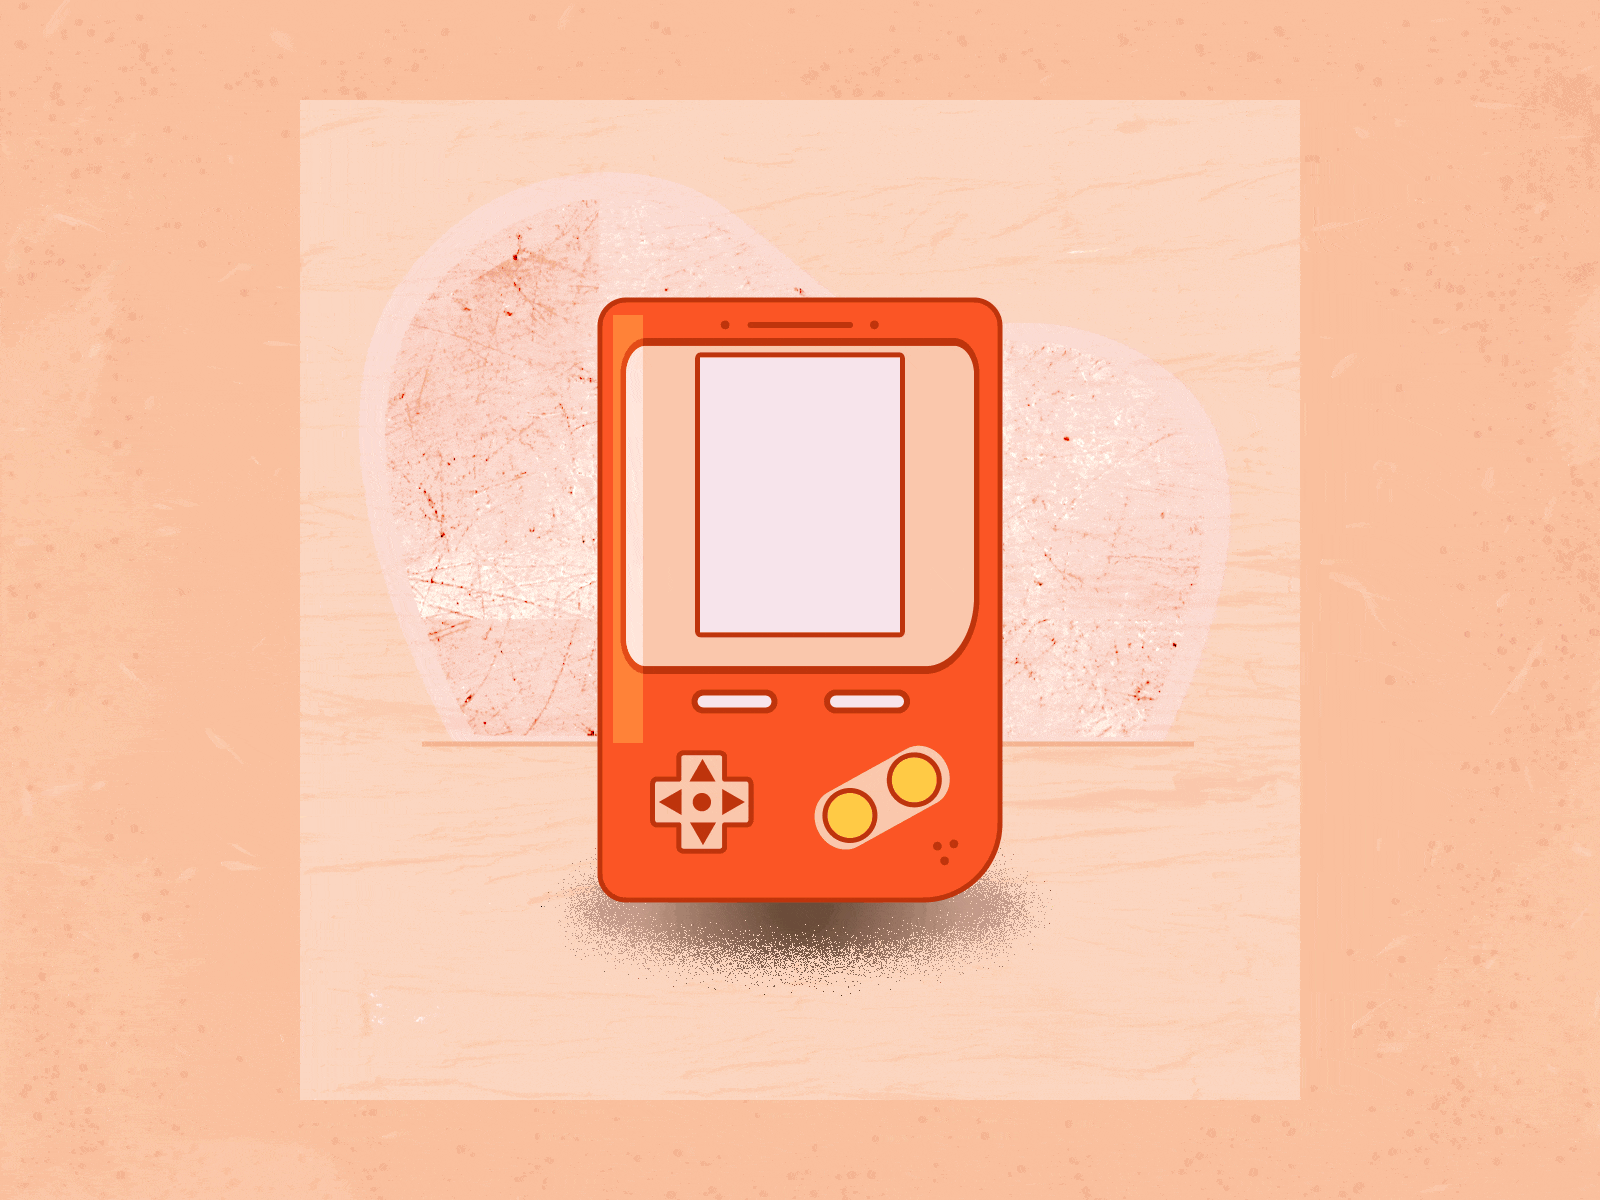 Game boy - tetris - animation animation animation 2d animation after effects animation design annamukhina game game boy illustration motion motion design motiondesignschool parts play tetris texture